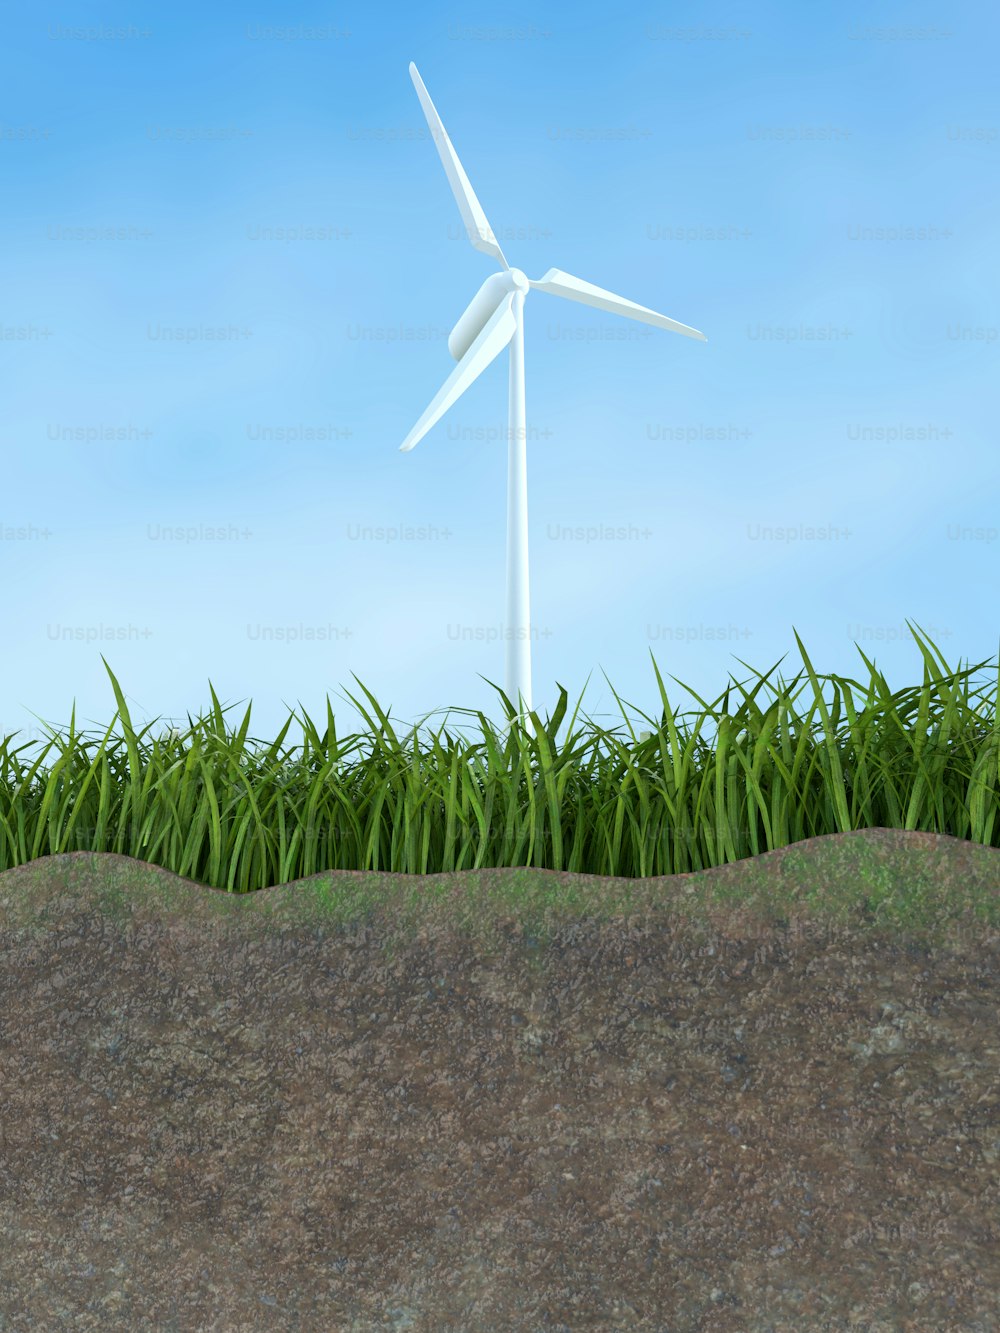 a wind turbine in the middle of a field of grass